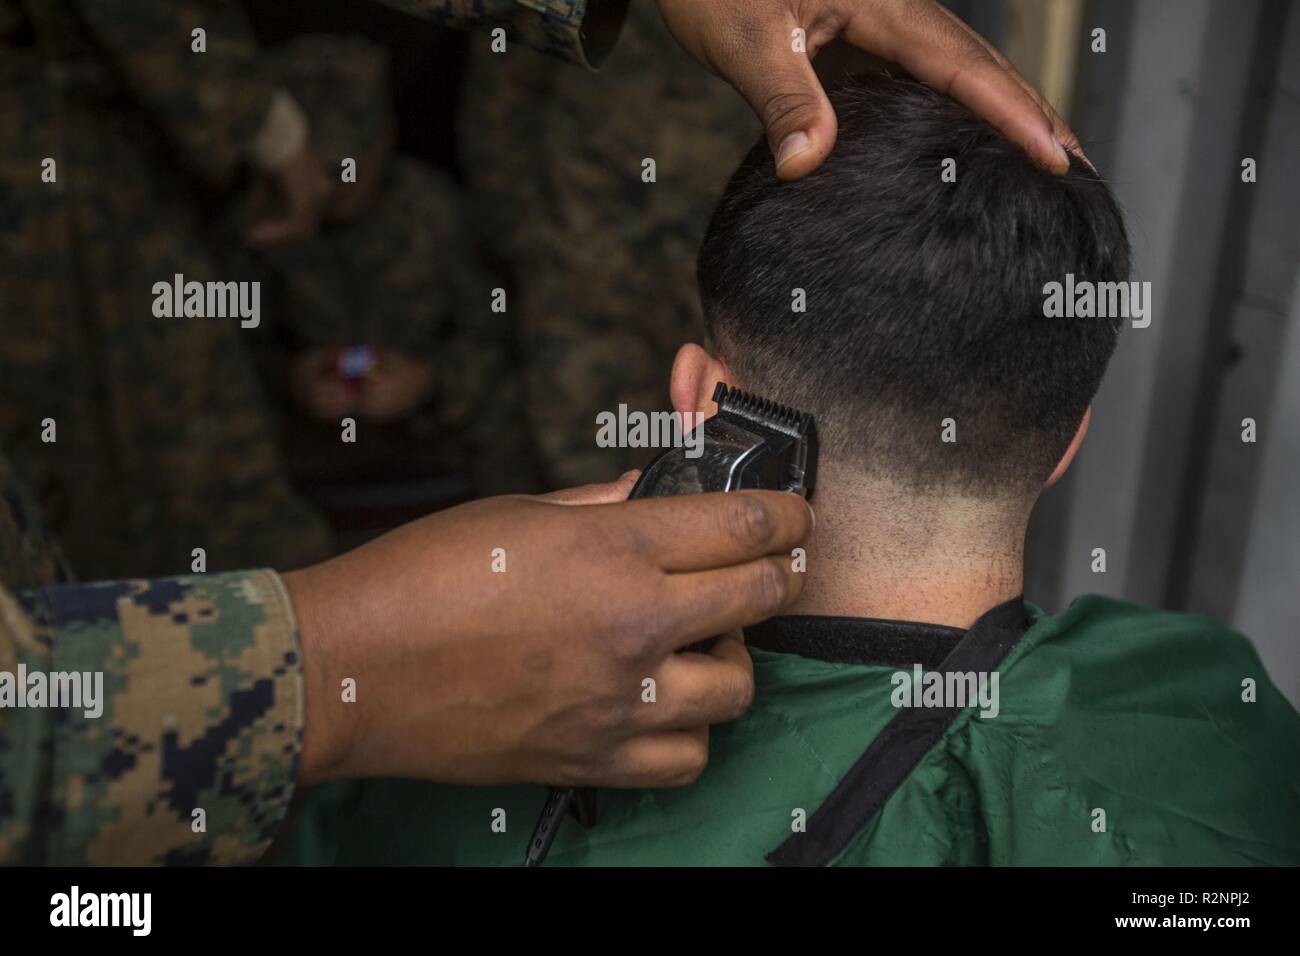 U.S. Marine Corps Sgt. Shaine Phillips with 2nd Intelligence Battalion, II Marine Expeditionary Force Information Group cuts Marines’ hair during Exercise Trident Juncture 18 at Vaernes Air Station, Norway, Nov. 4, 2018. Trident Juncture 18 enhances the U.S. and NATO Allies’ and partners’ abilities to work together collectively to conduct military operations under challenging conditions. Stock Photo